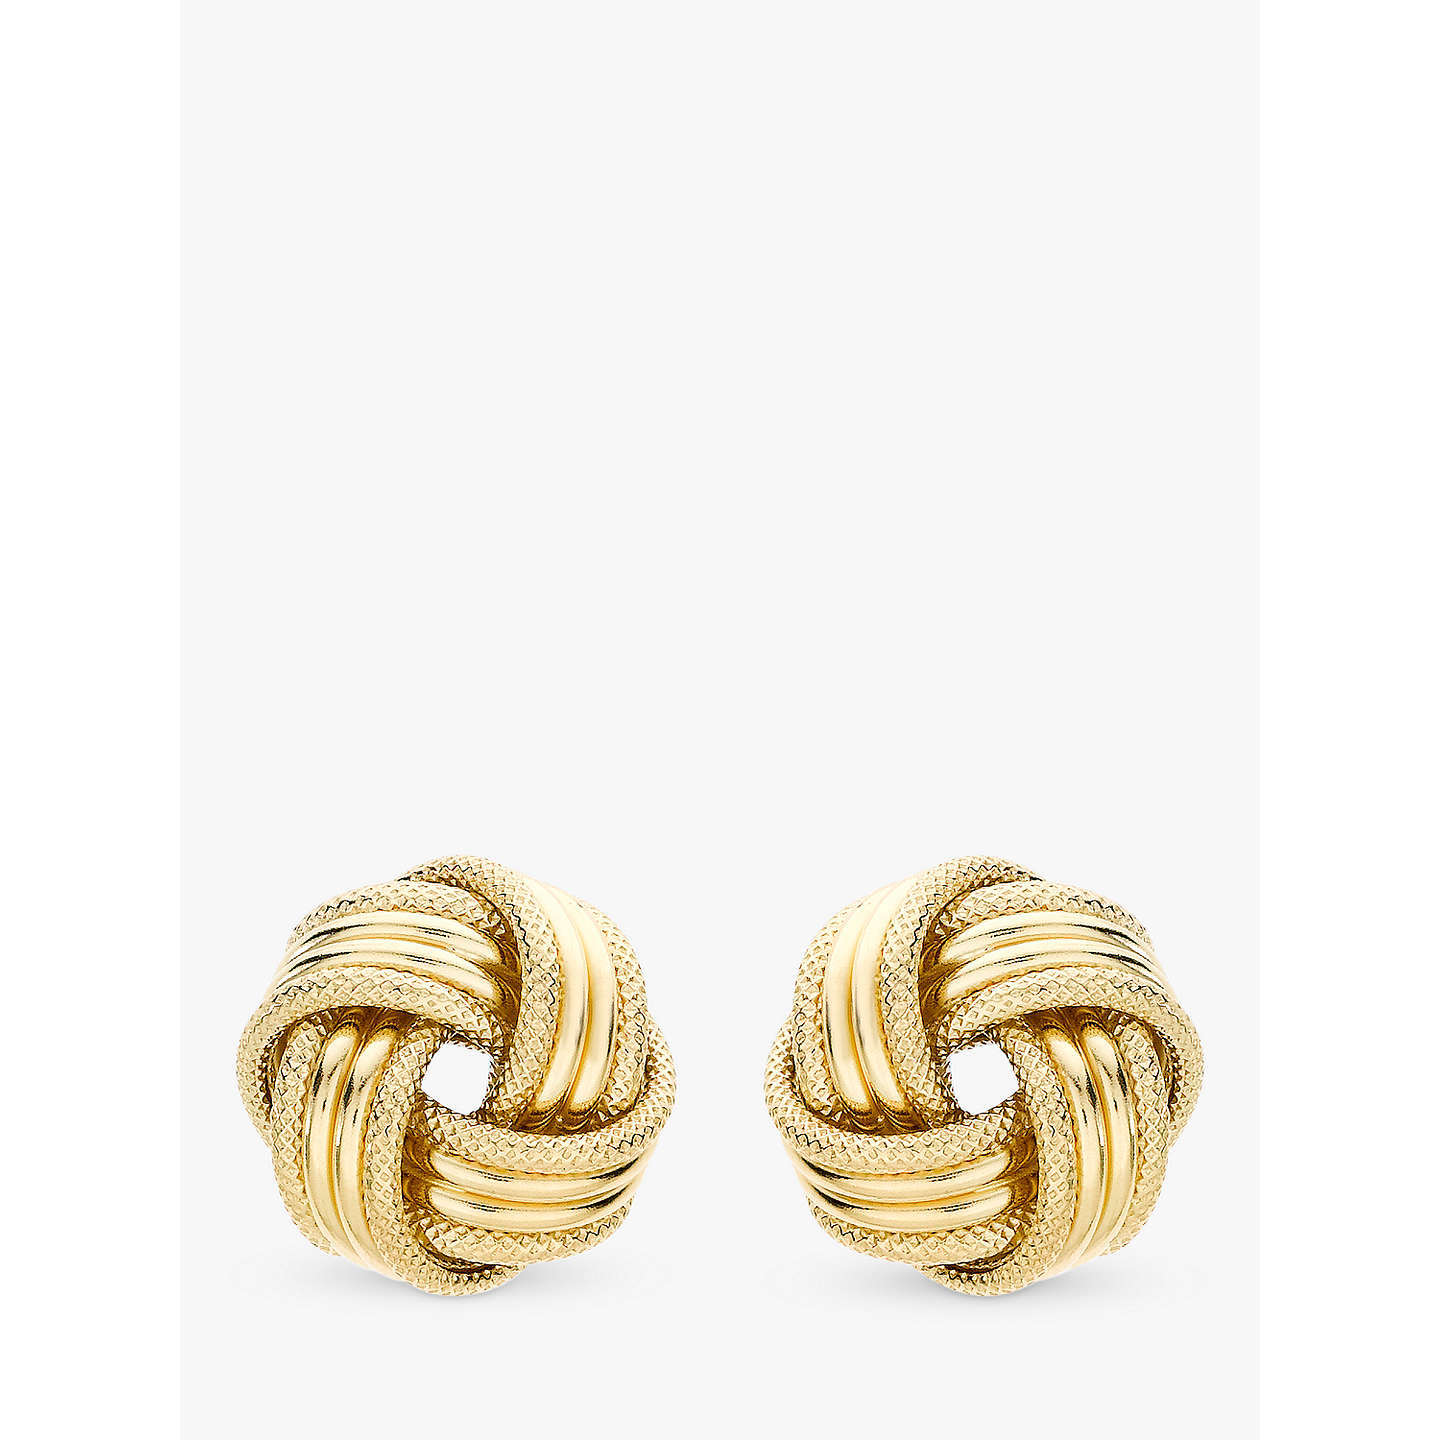 IBB 9ct Gold Knot Earrings, Gold at John Lewis